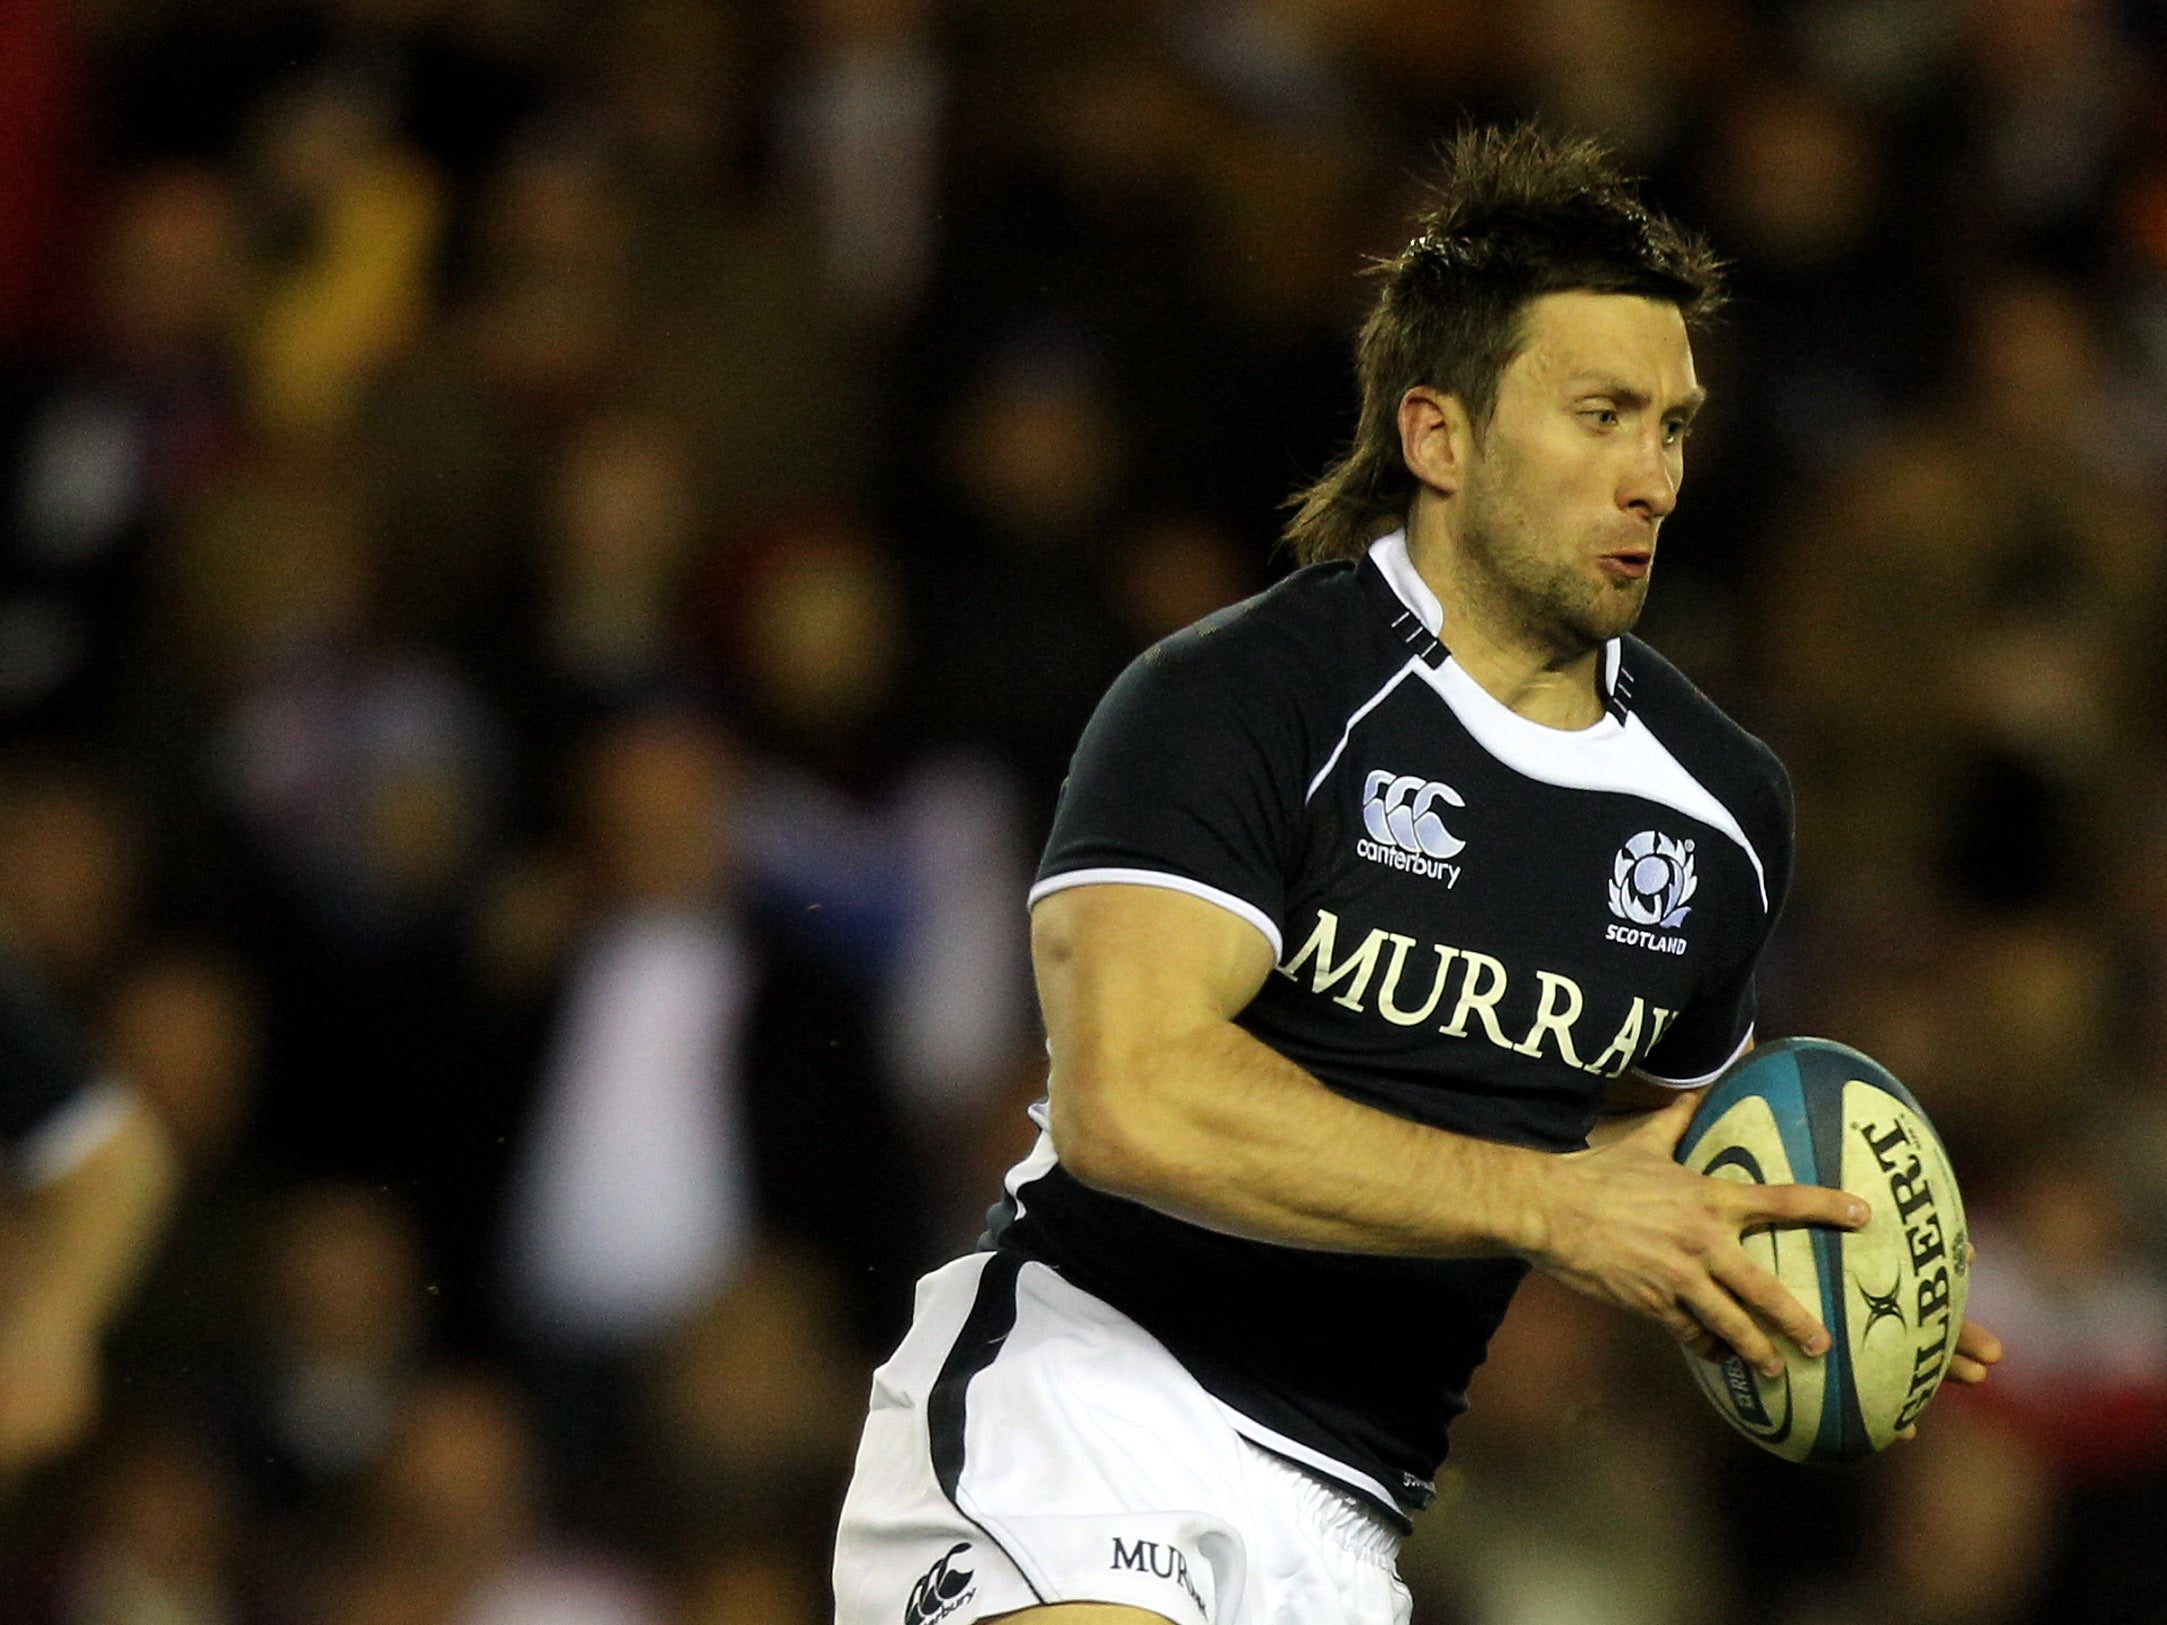 Danielli played for Scotland between 2003 and 2011